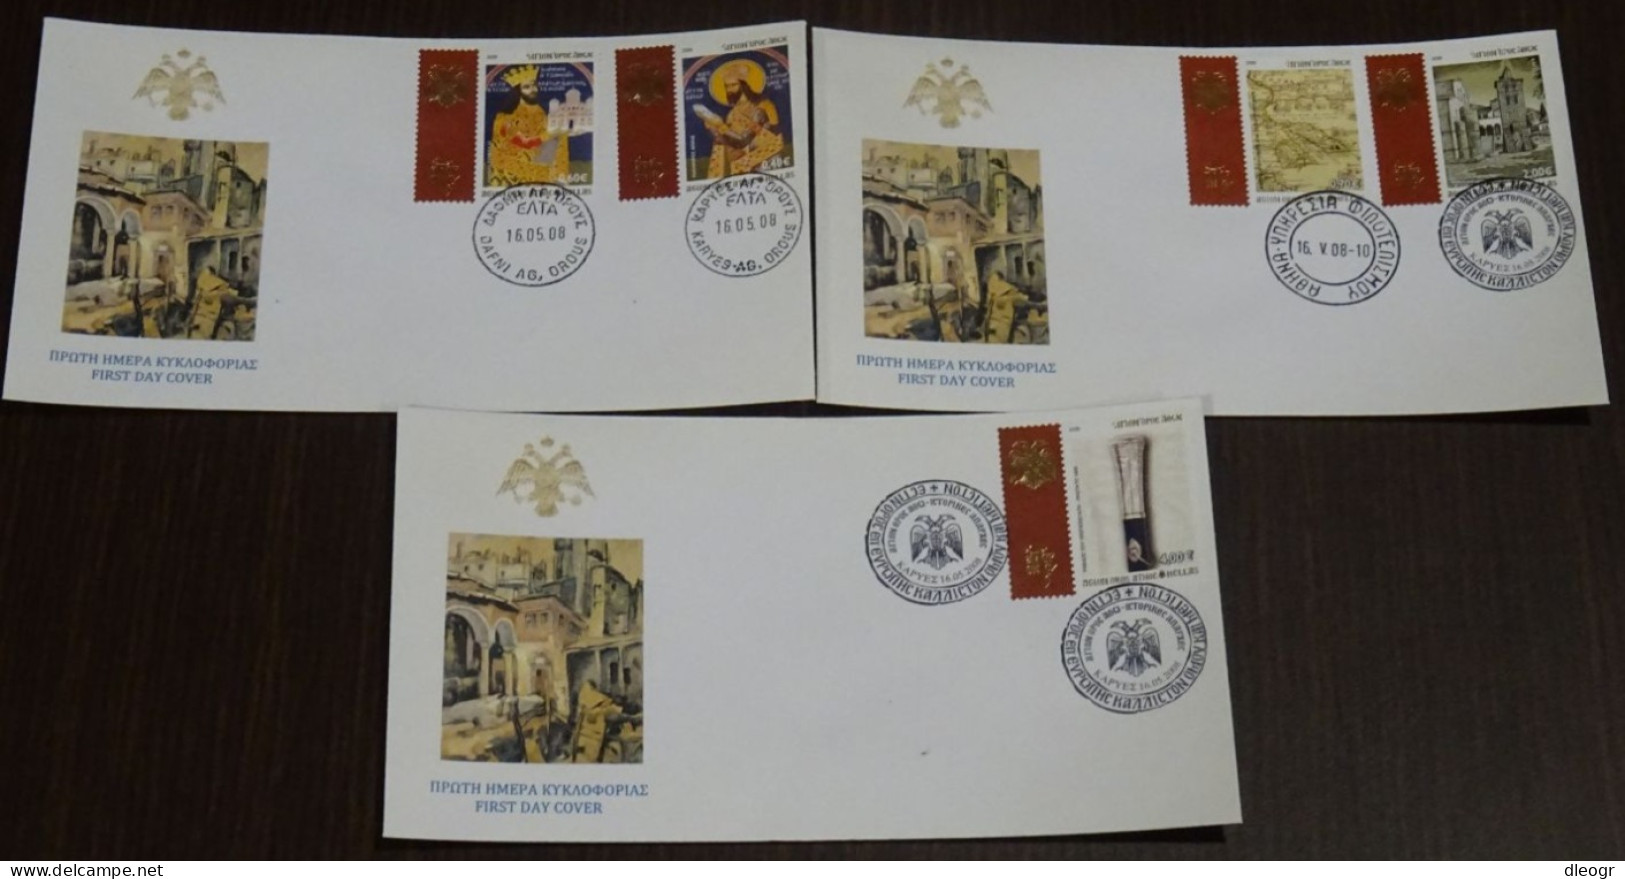 Greece Mount Athos 2008 Historical Beginning Unofficial FDC - FDC